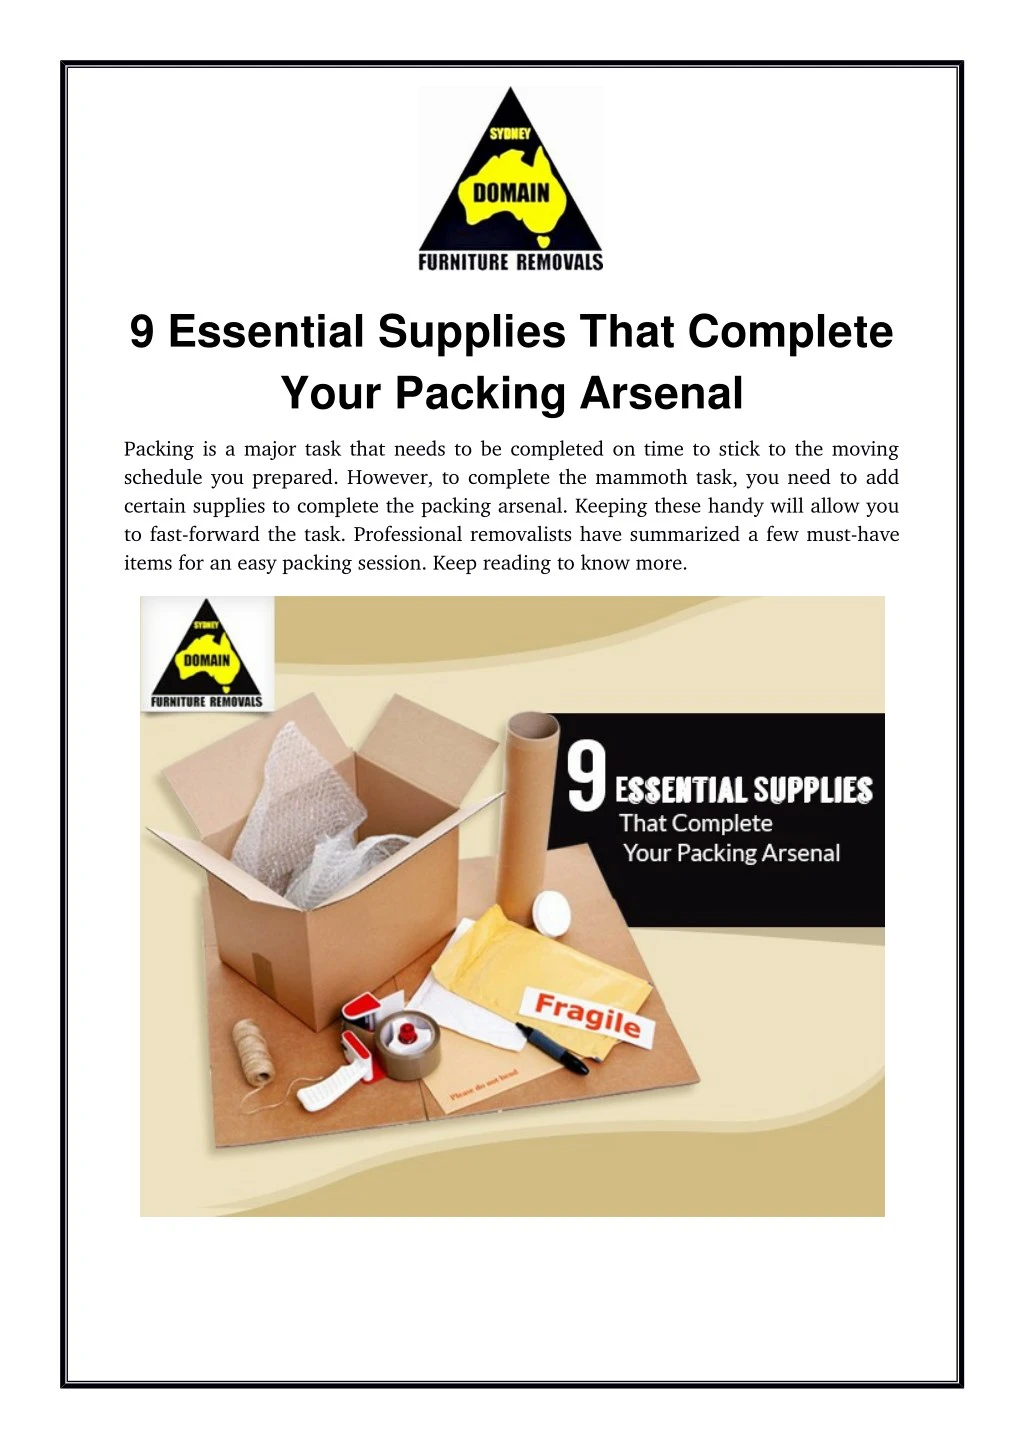 9 essential supplies that complete your packing